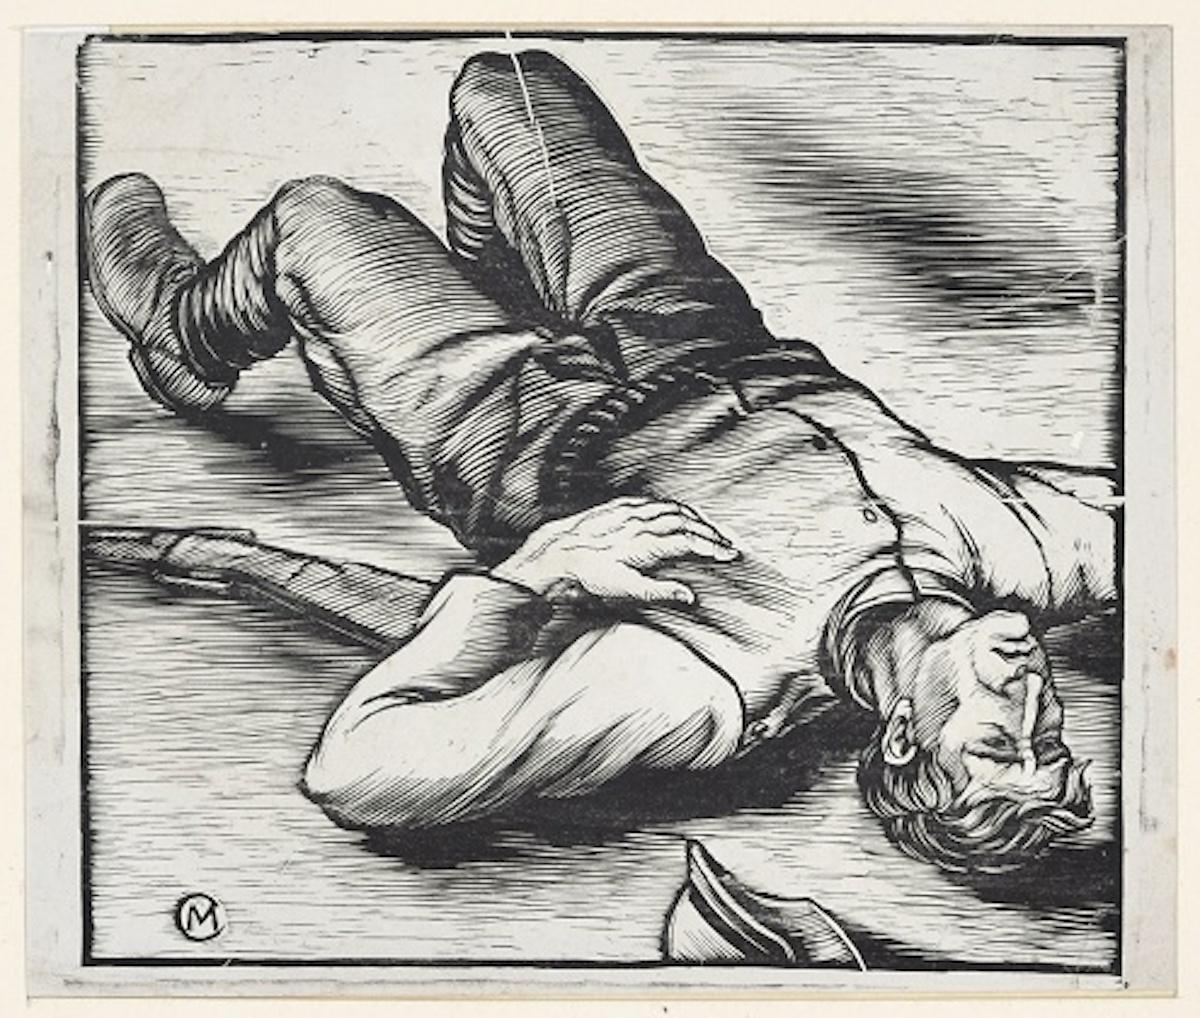 Unknown Figurative Print - Wounded Soldier - Original Woodcut Print on Paper - Mid-20th century